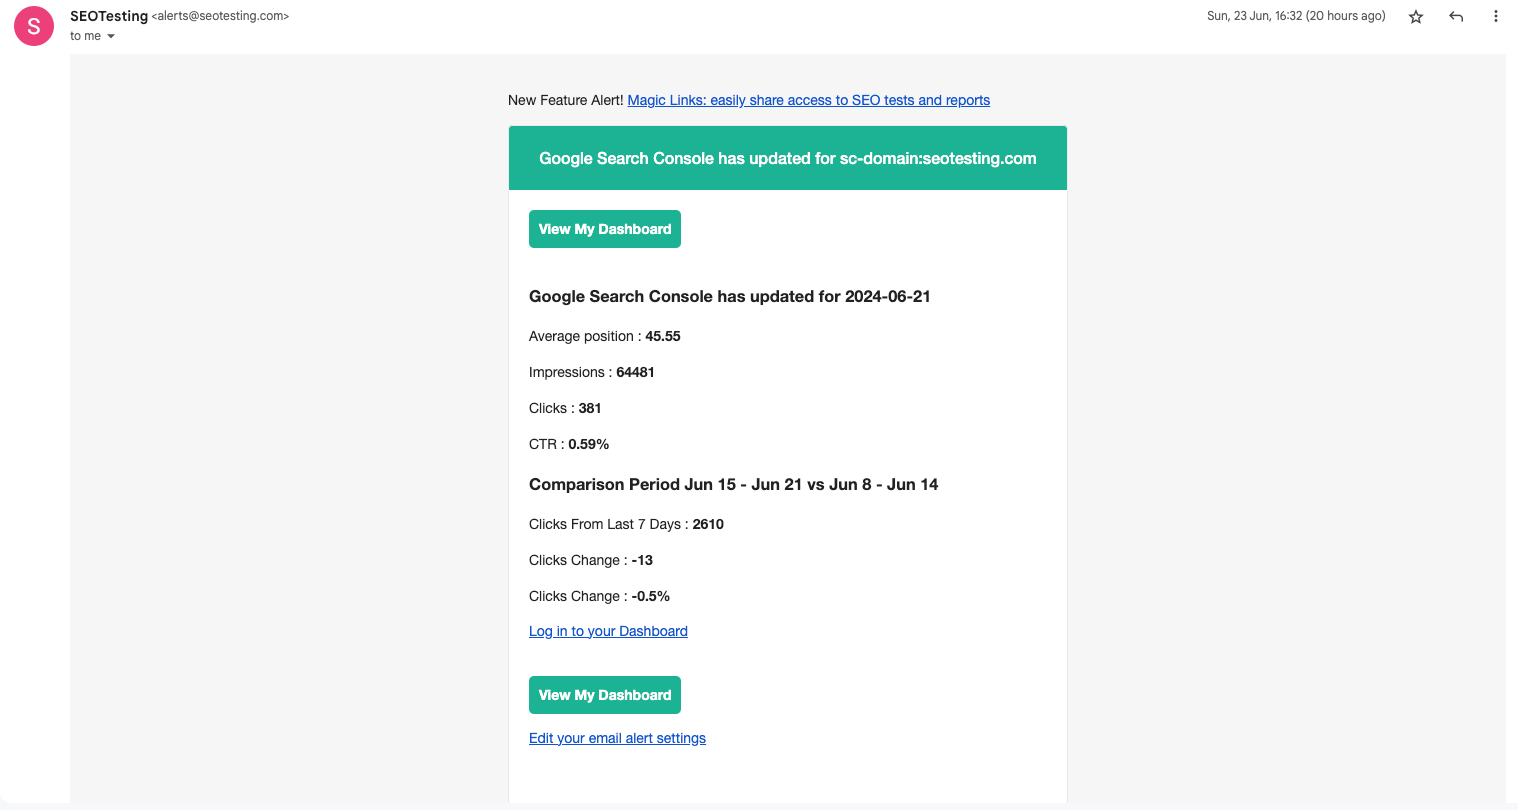 SEOTesting email alert showing Google Search Console updates and metrics for a domain. 